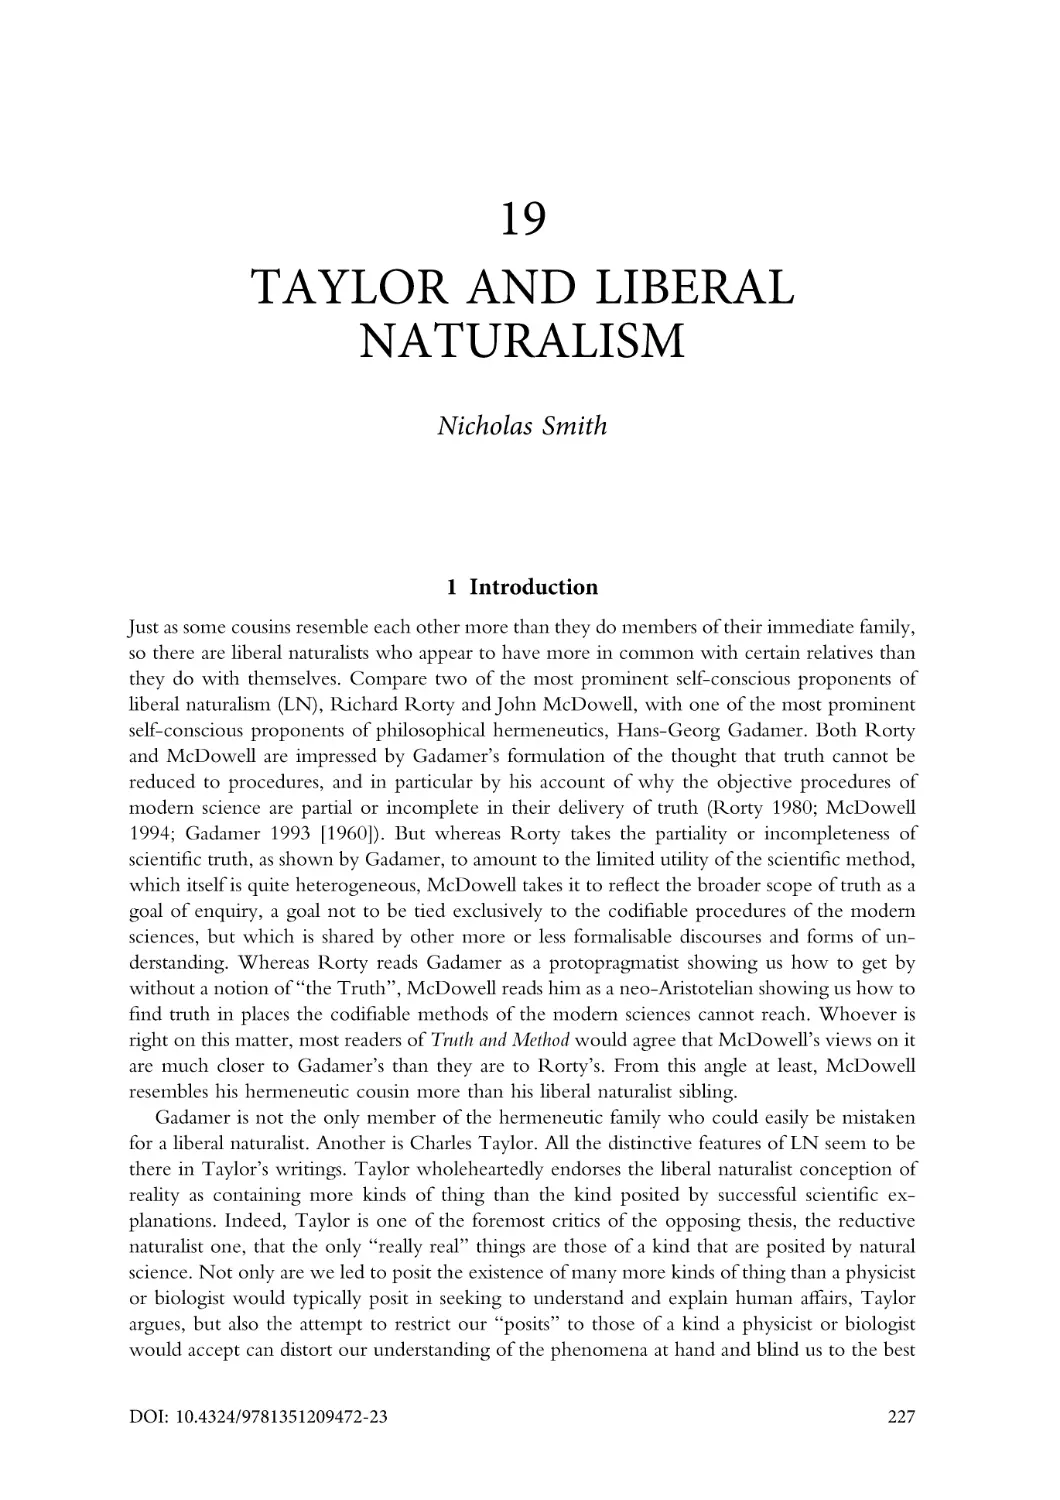 19. Taylor and liberal naturalism
1. Introduction